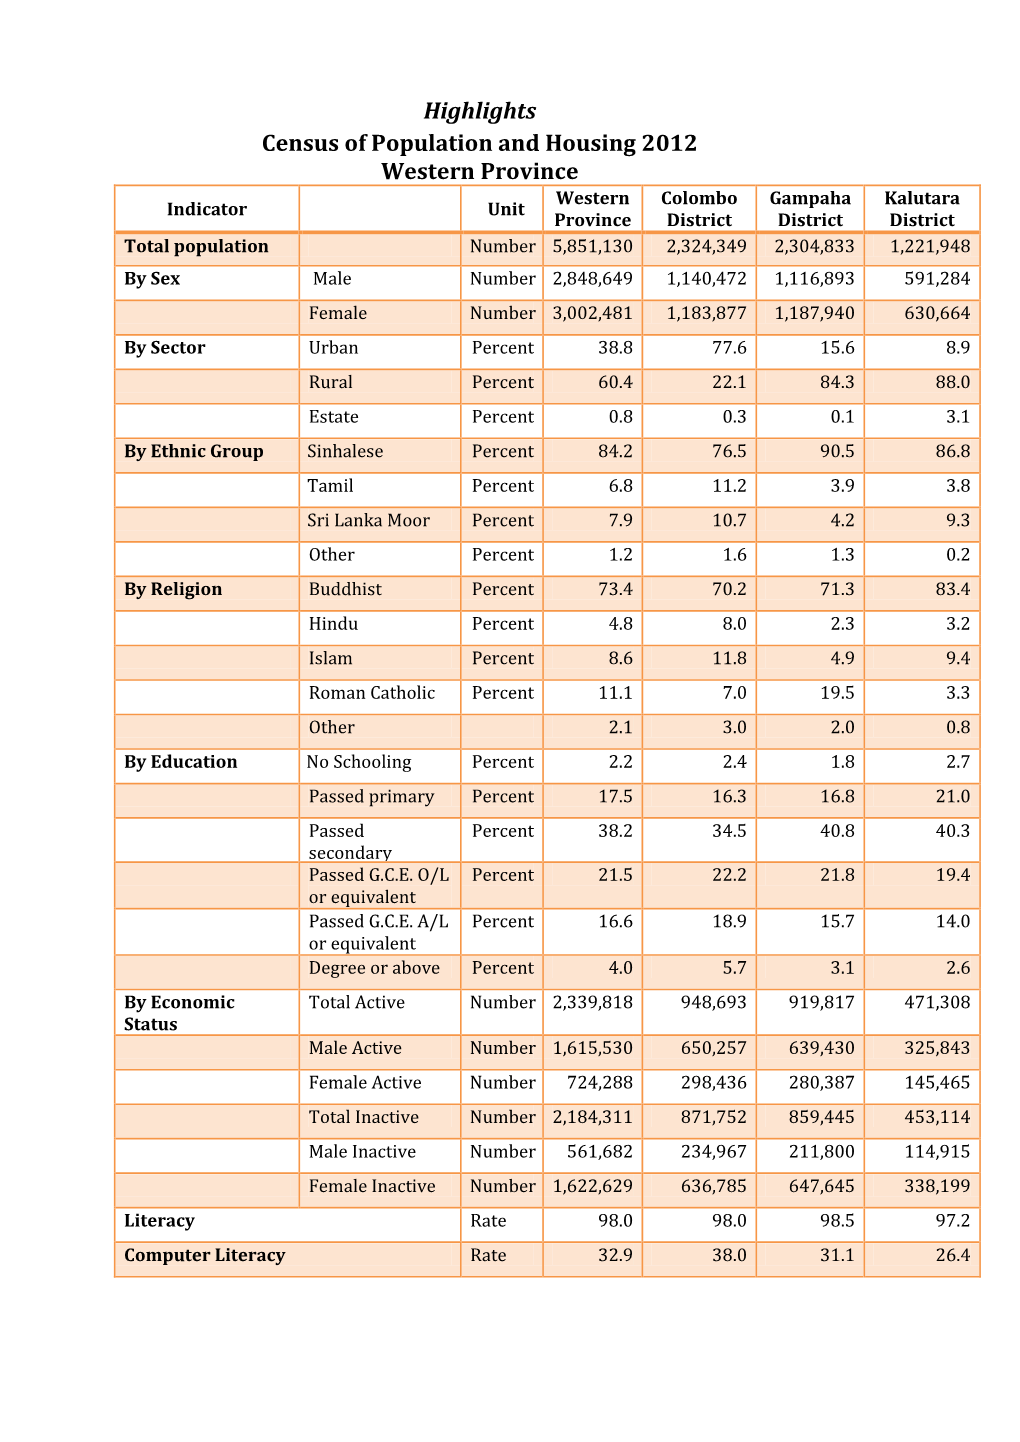 Highlights Census of Population and Housing 2012 Western Province